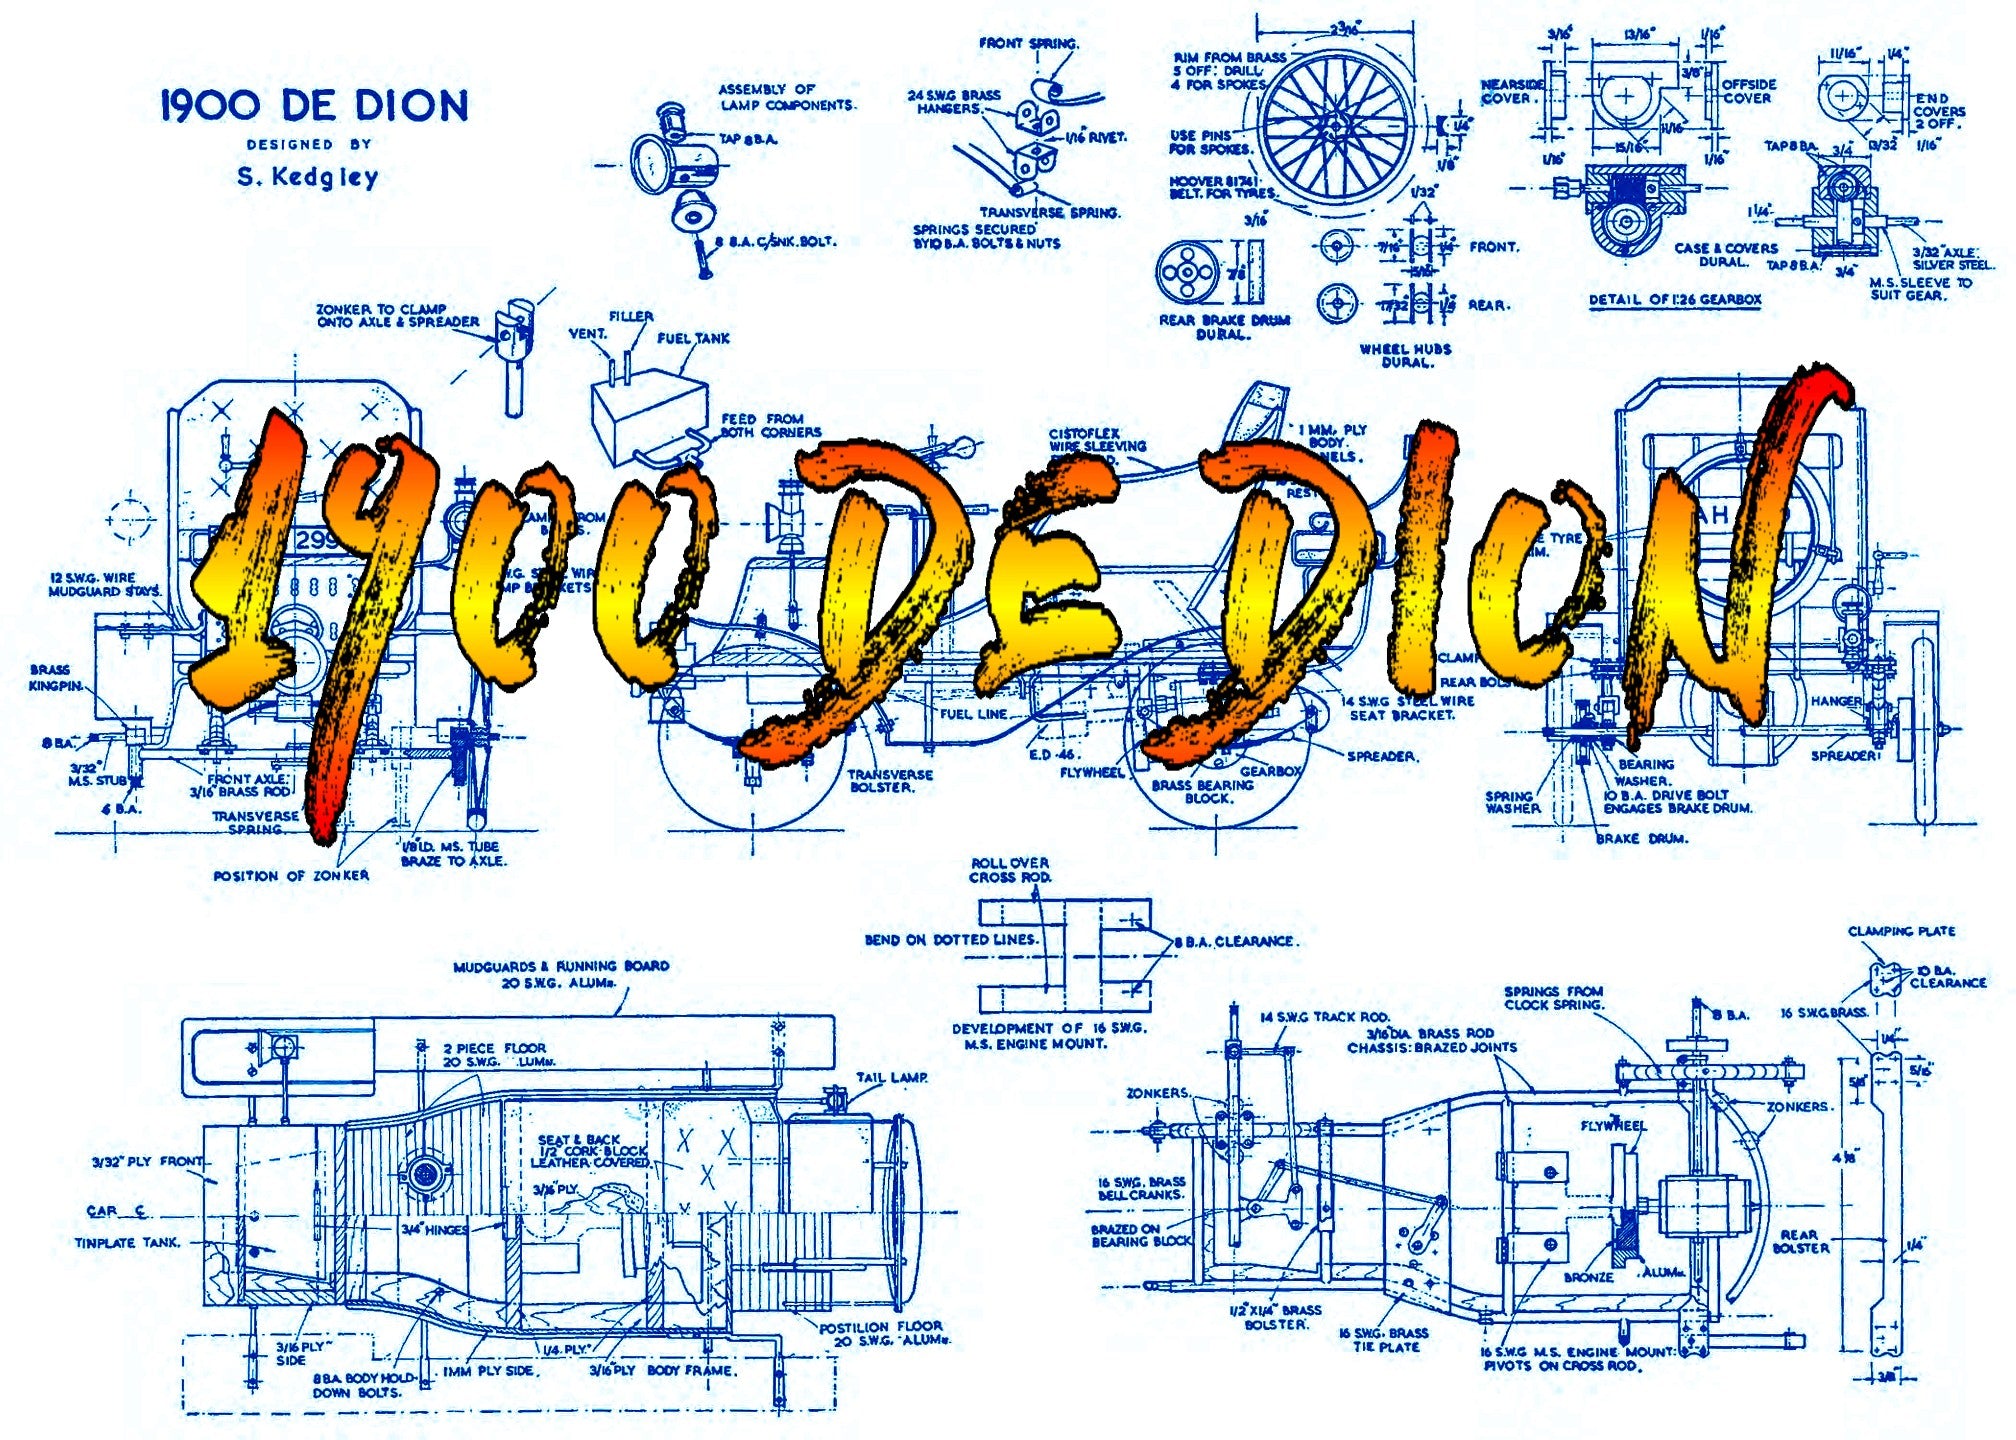 full size printed plan scale 1900 de dion build as display or powered not especially difficult,